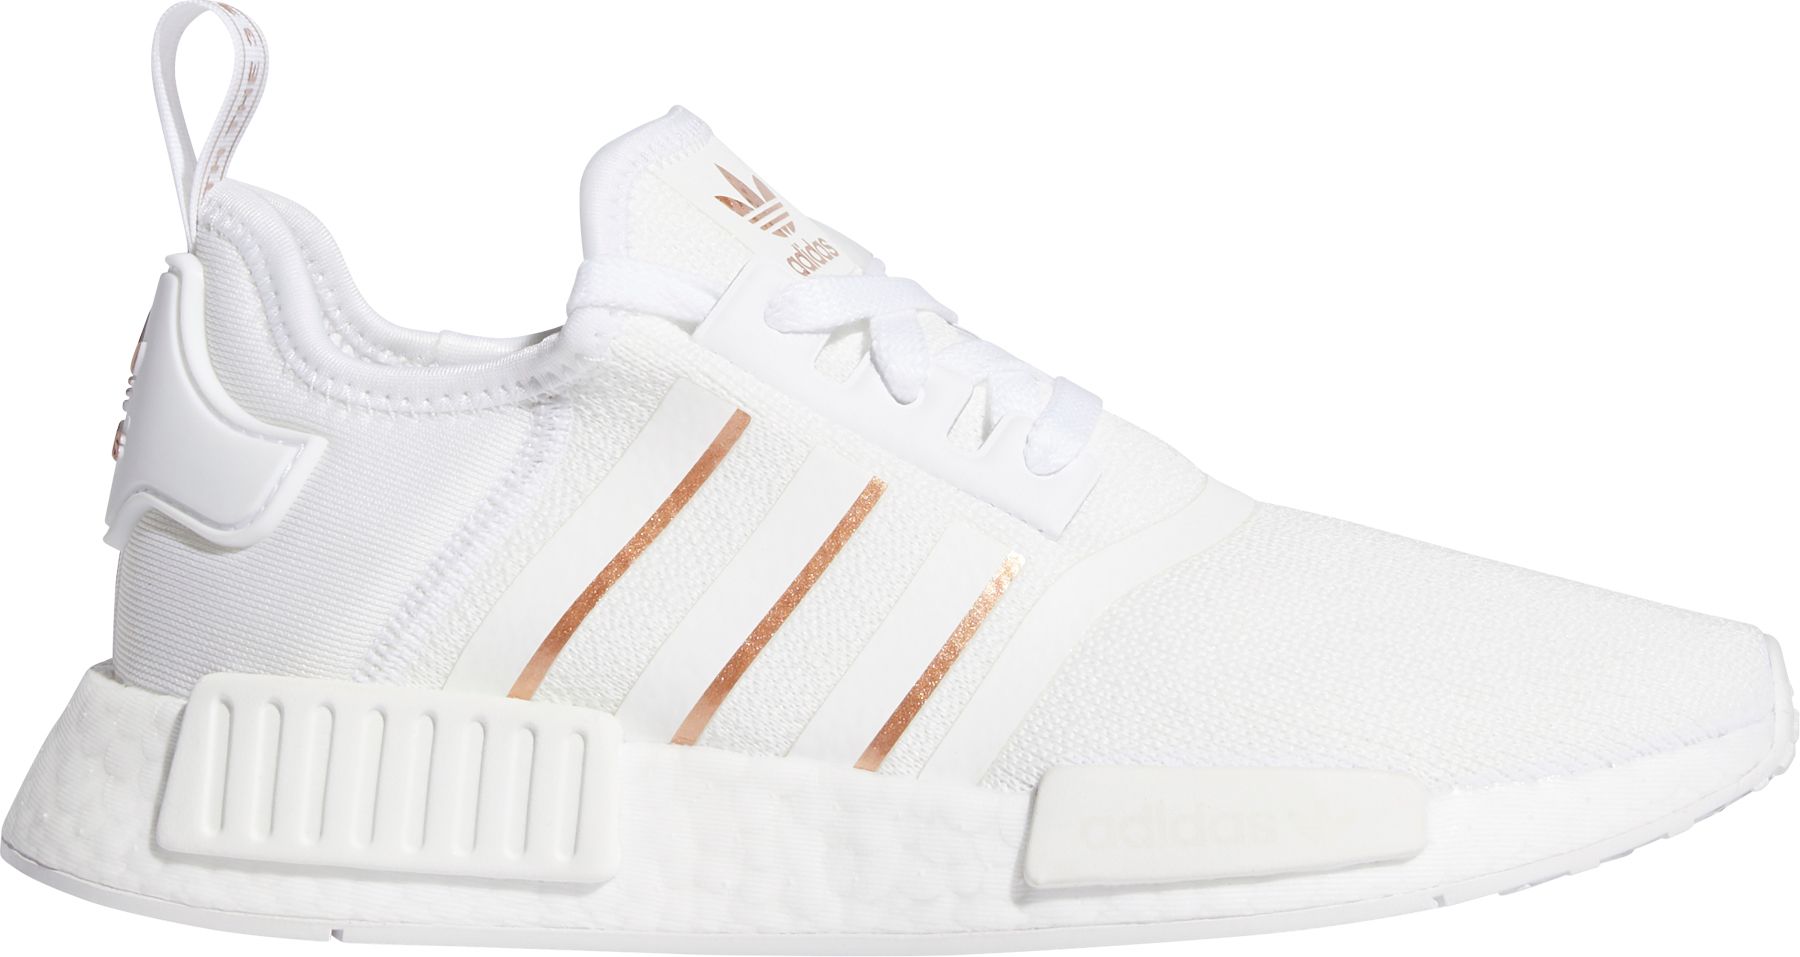 White Adidas Shoes Best Price Guarantee At Dick S